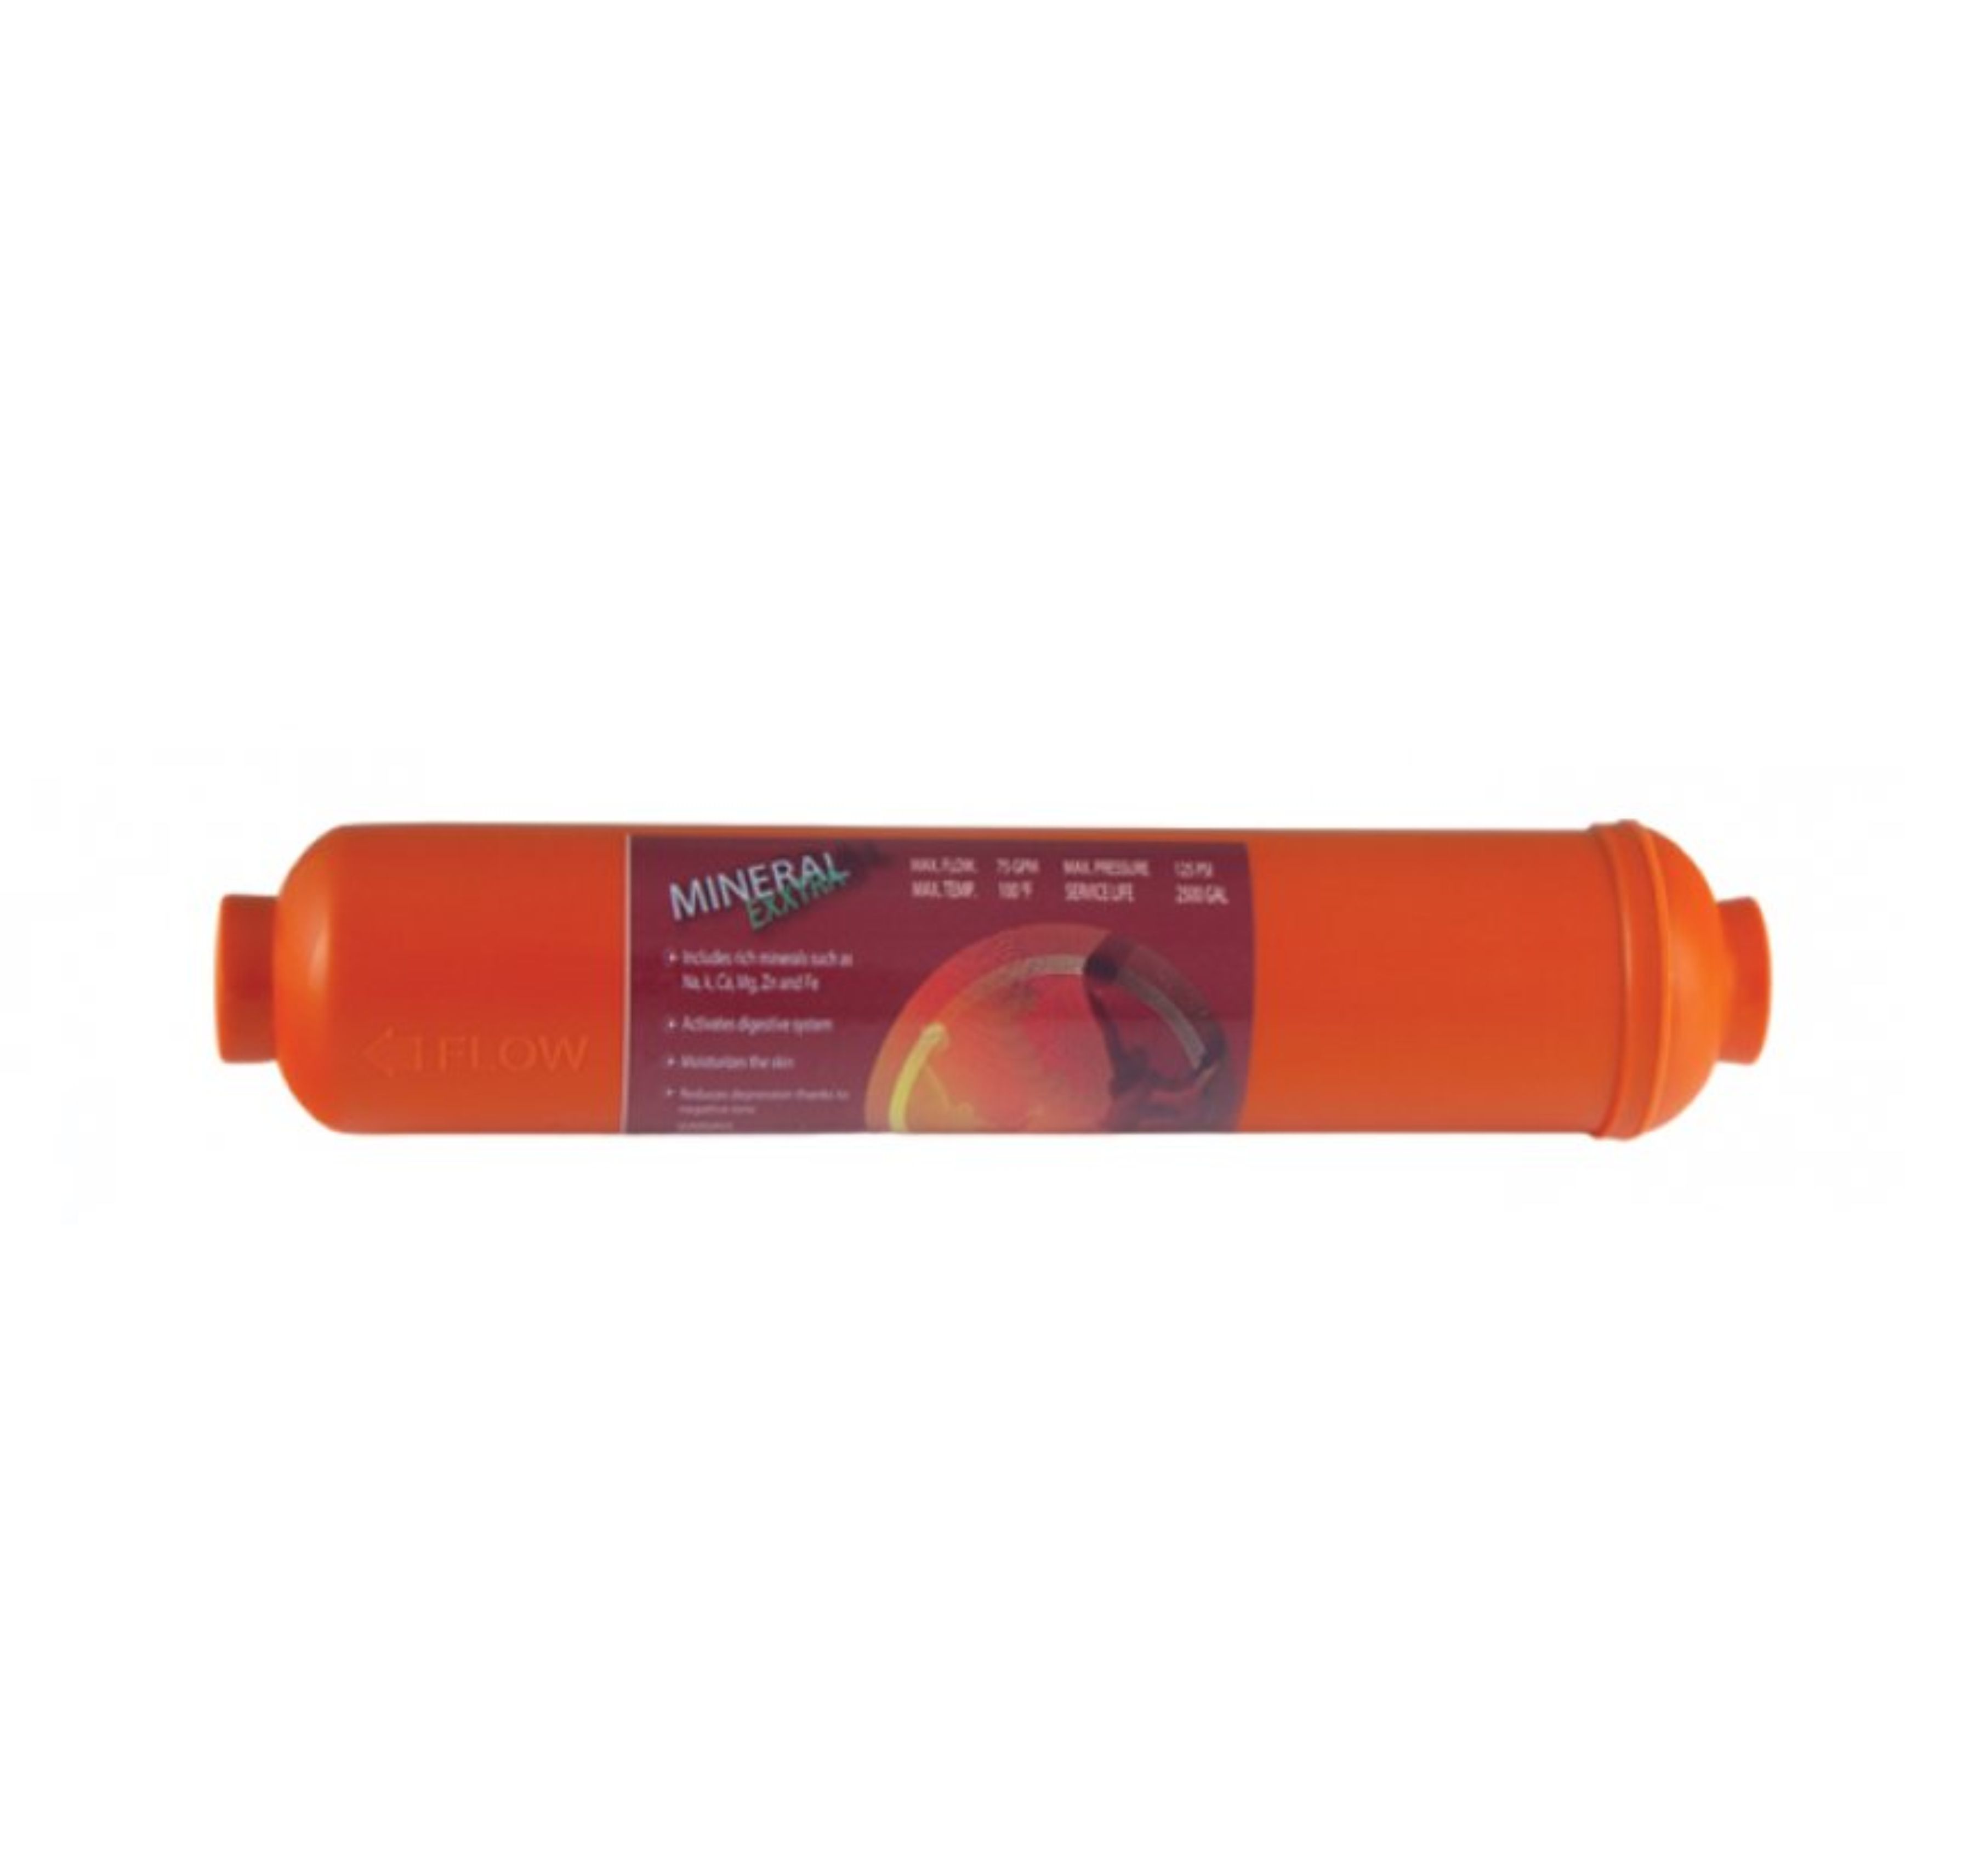 ST-33 Mineral Filtre, Extra